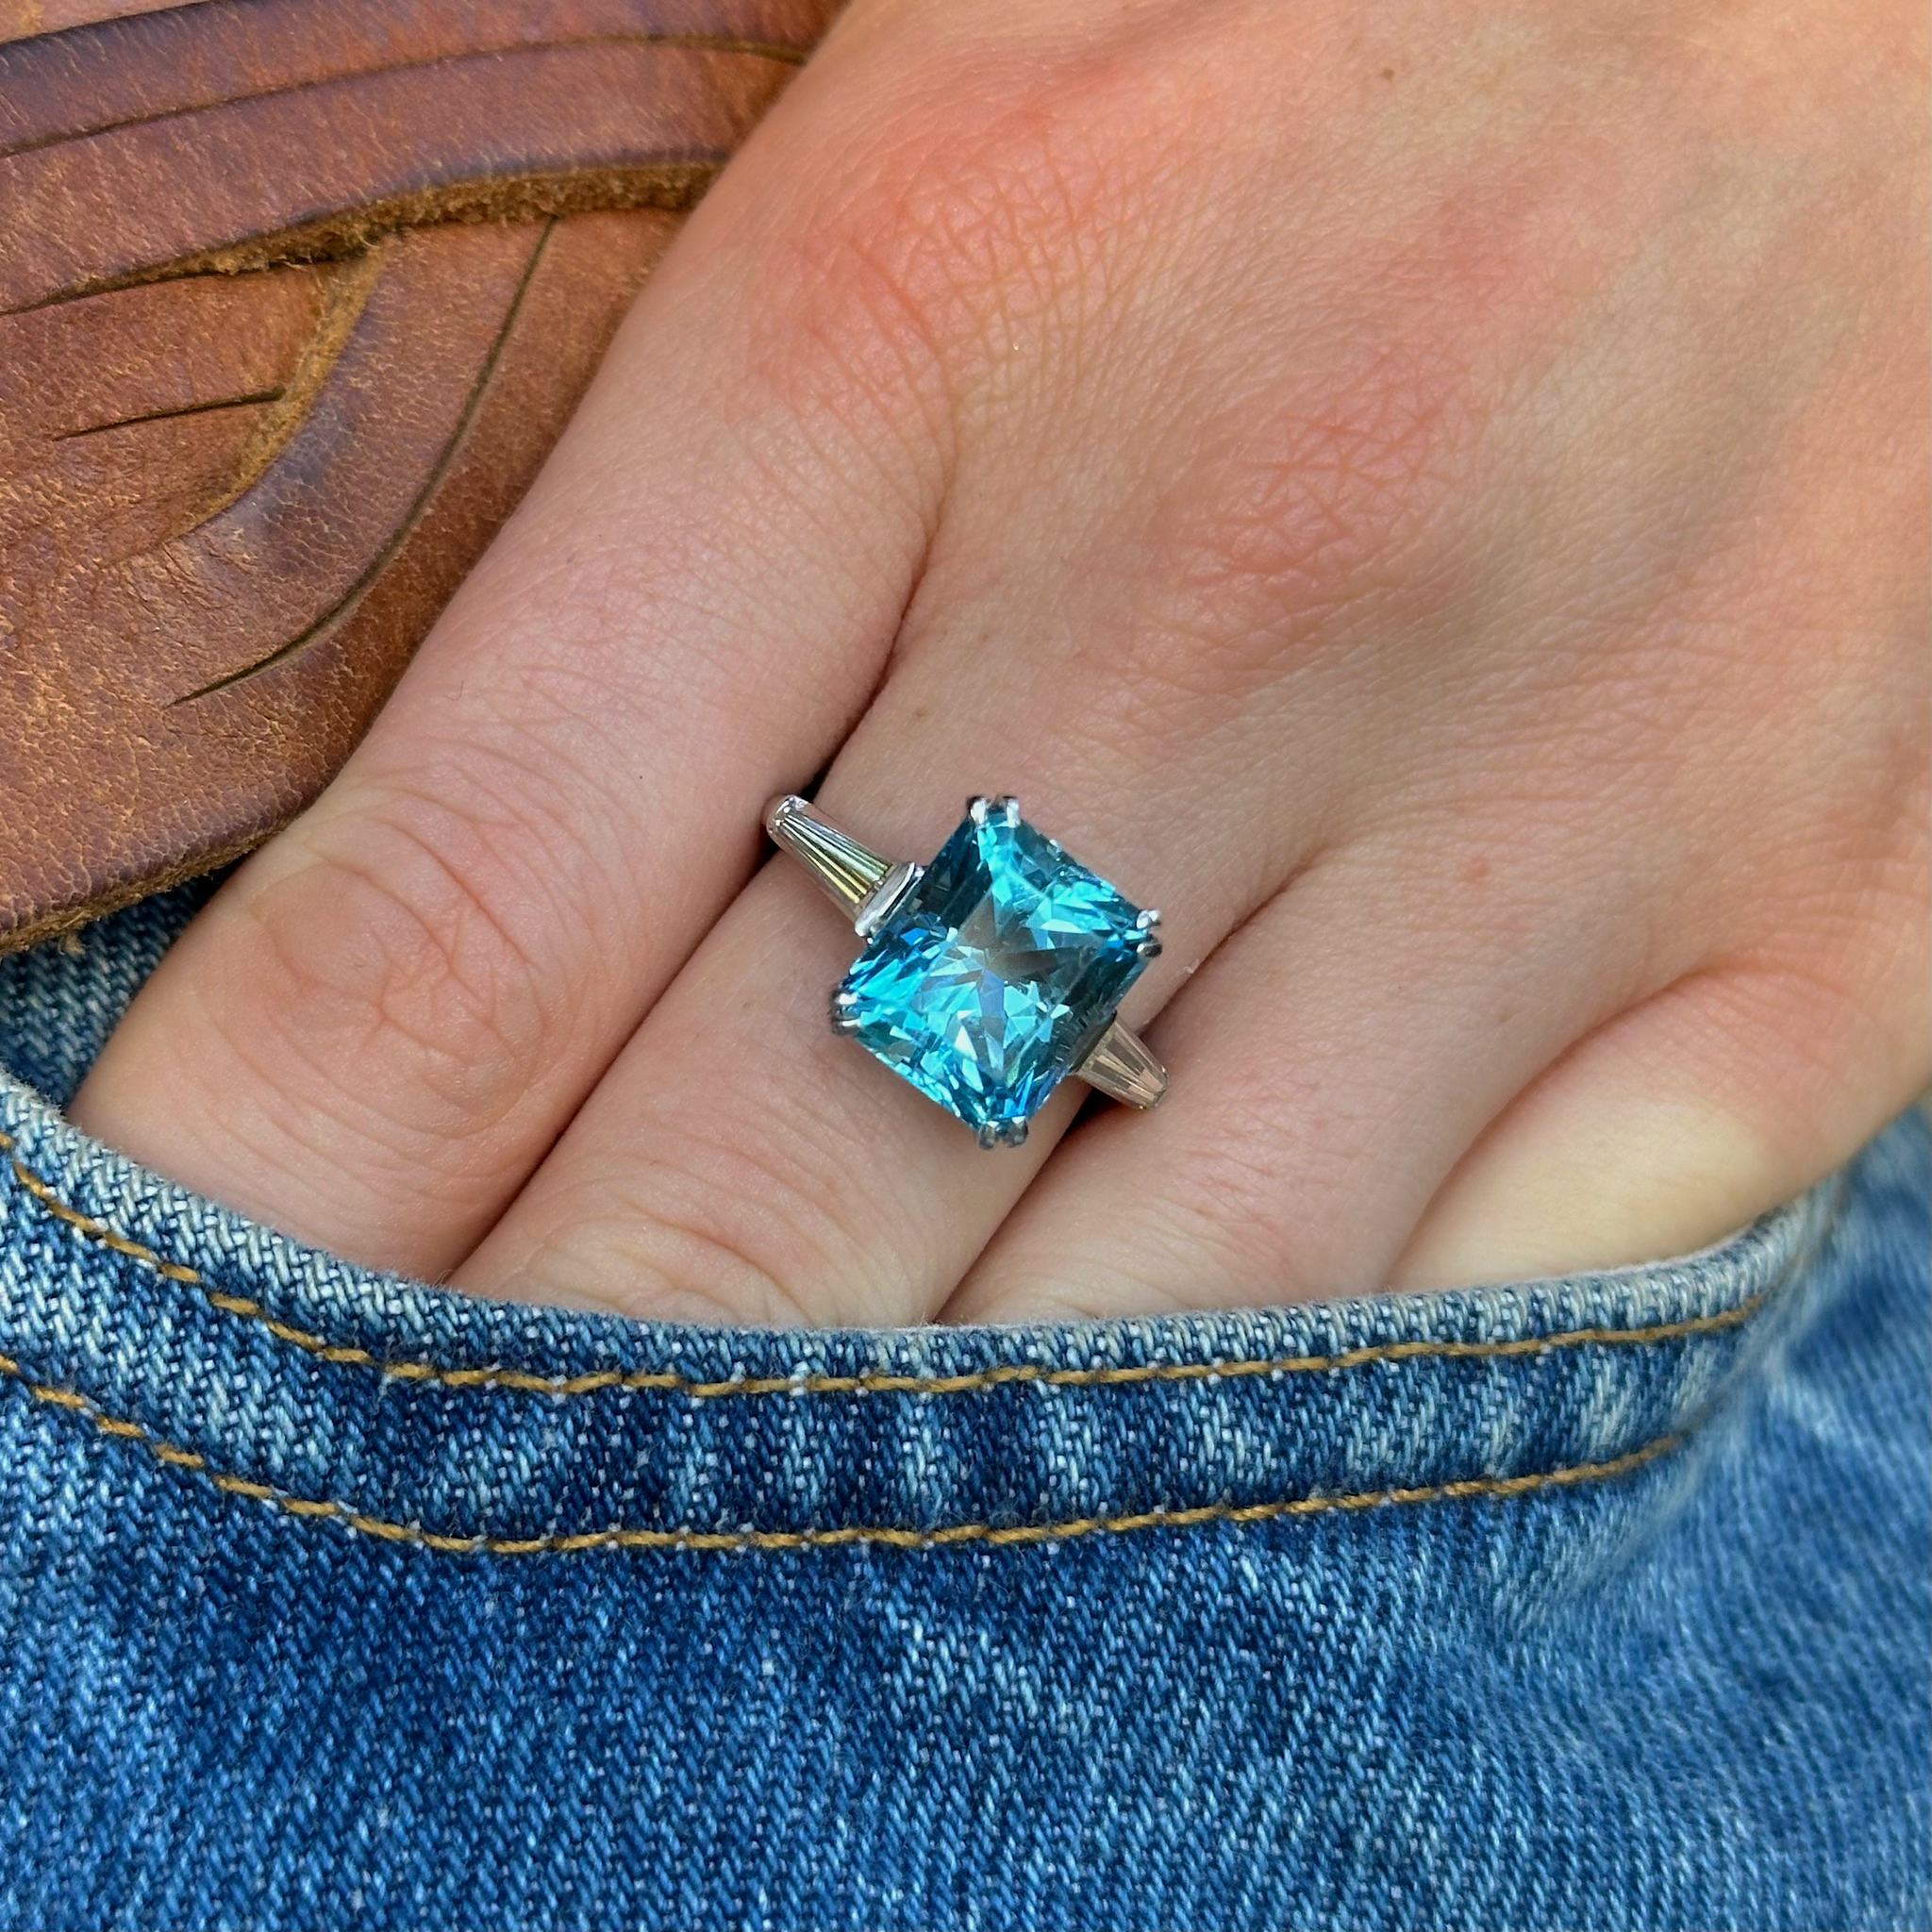 Vintage, Art Deco Topaz and Diamond Ring, Platinum worn on hand and placed in pocket of jeans